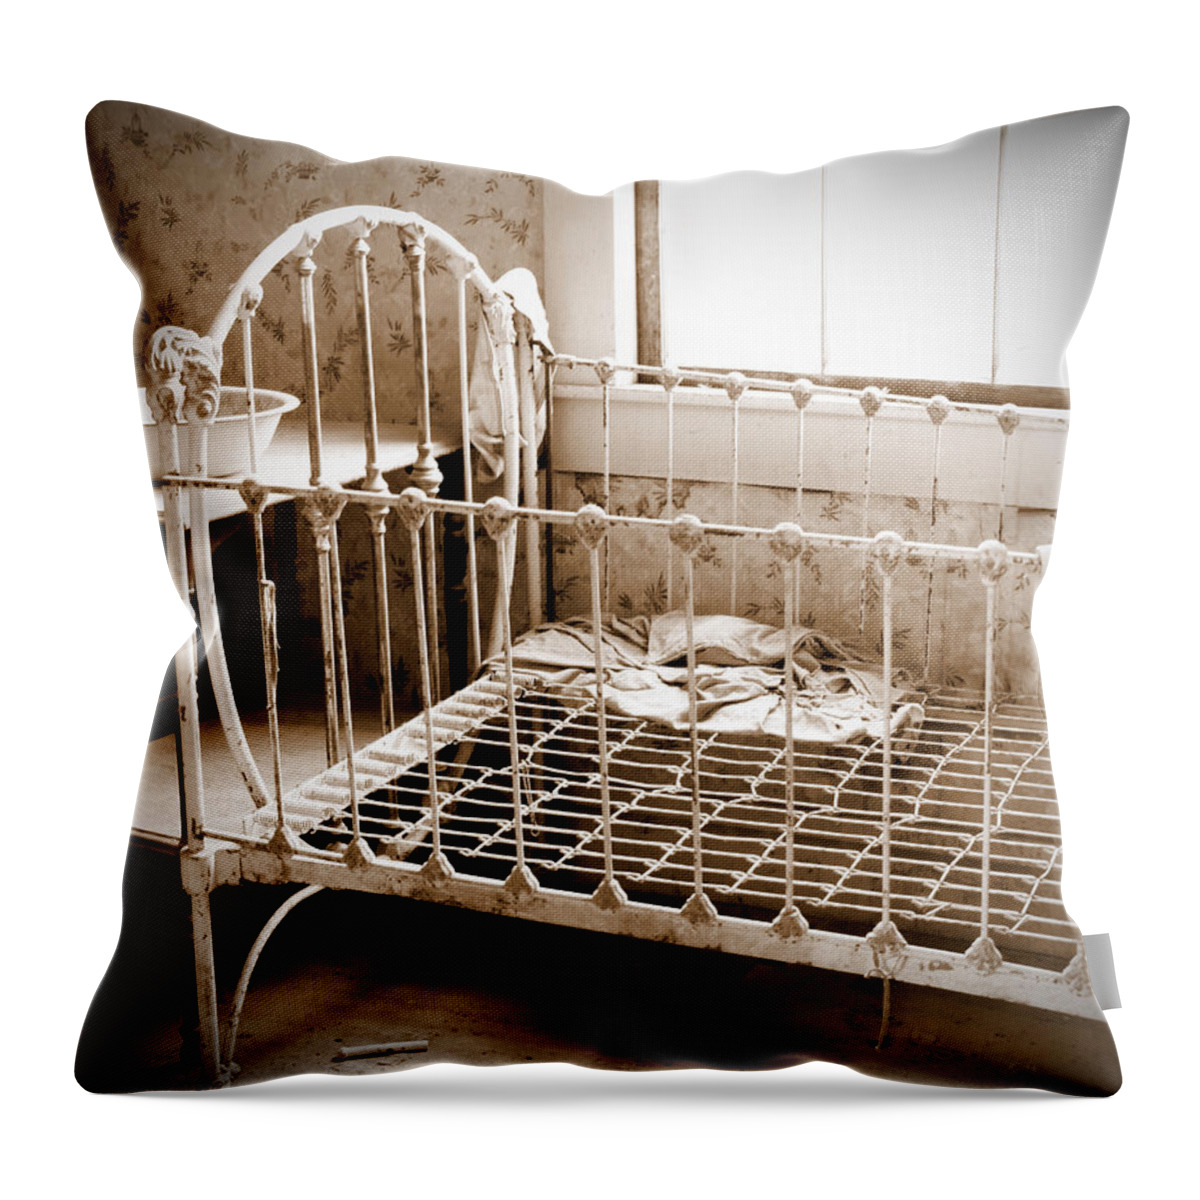 Vintage Throw Pillow featuring the photograph Vintage Crib by Marcia Socolik